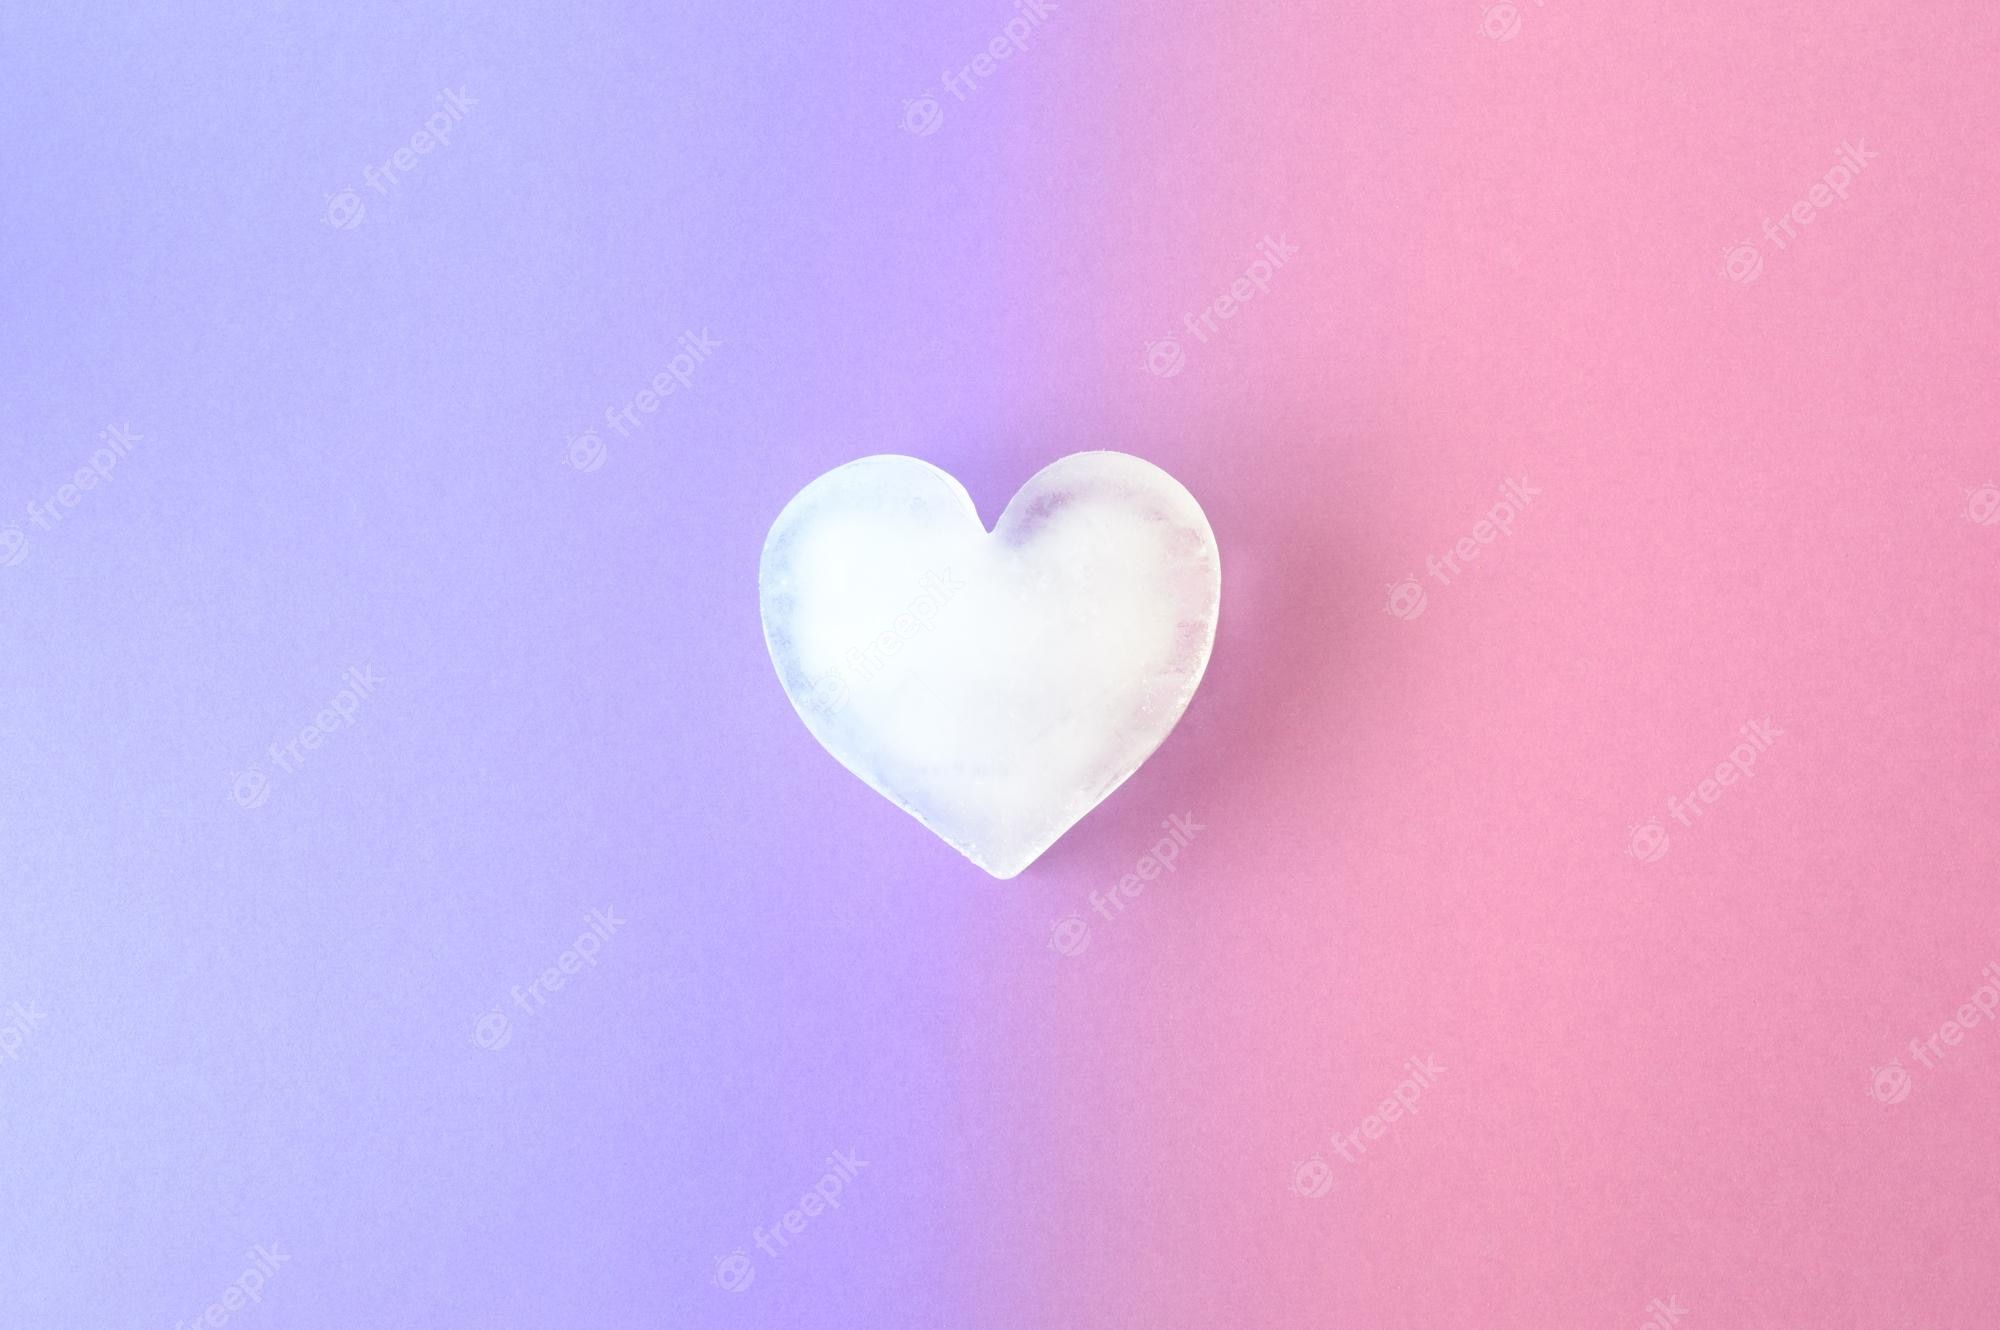 A heart shaped object is on top of pink and blue background - Pink heart